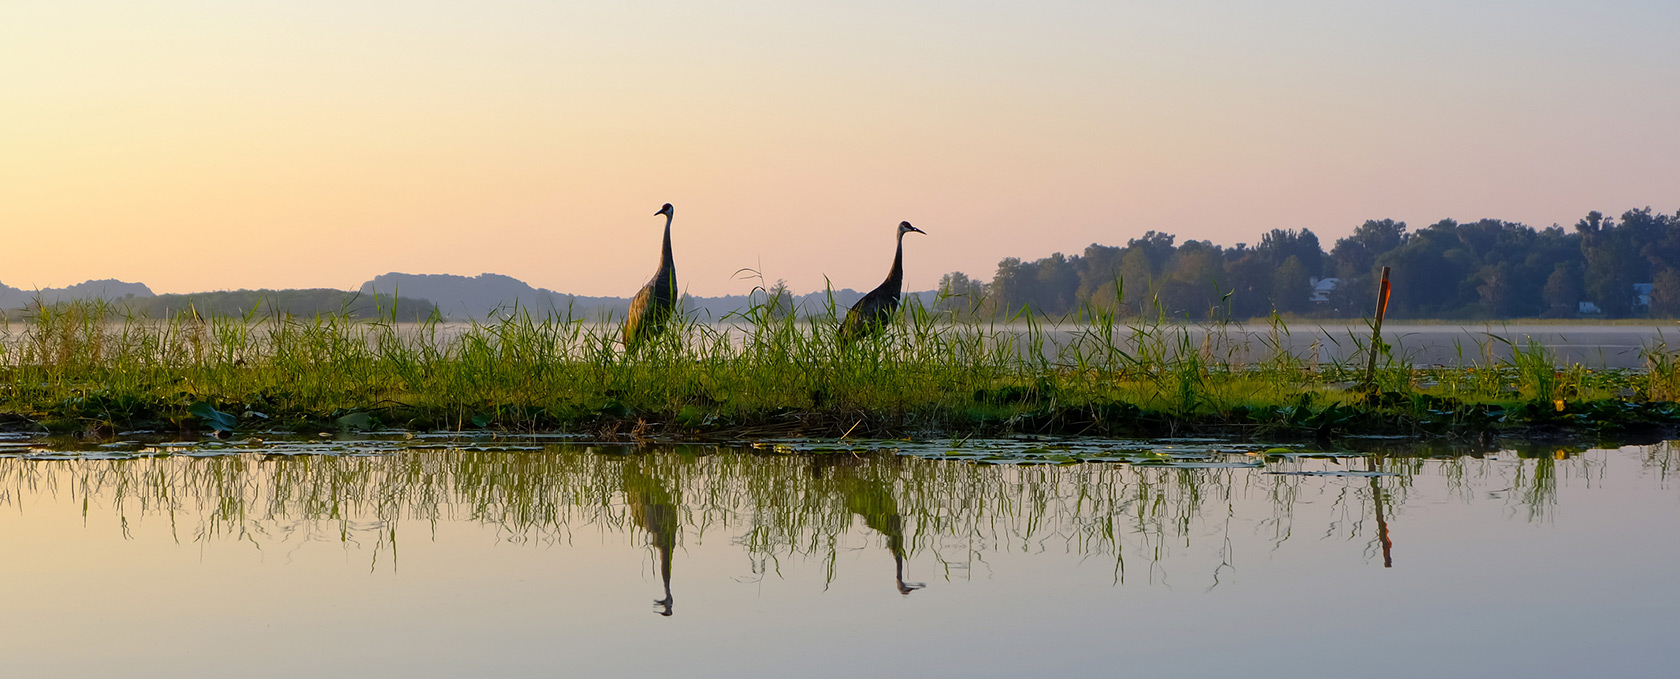 Two adult cranes in a lake